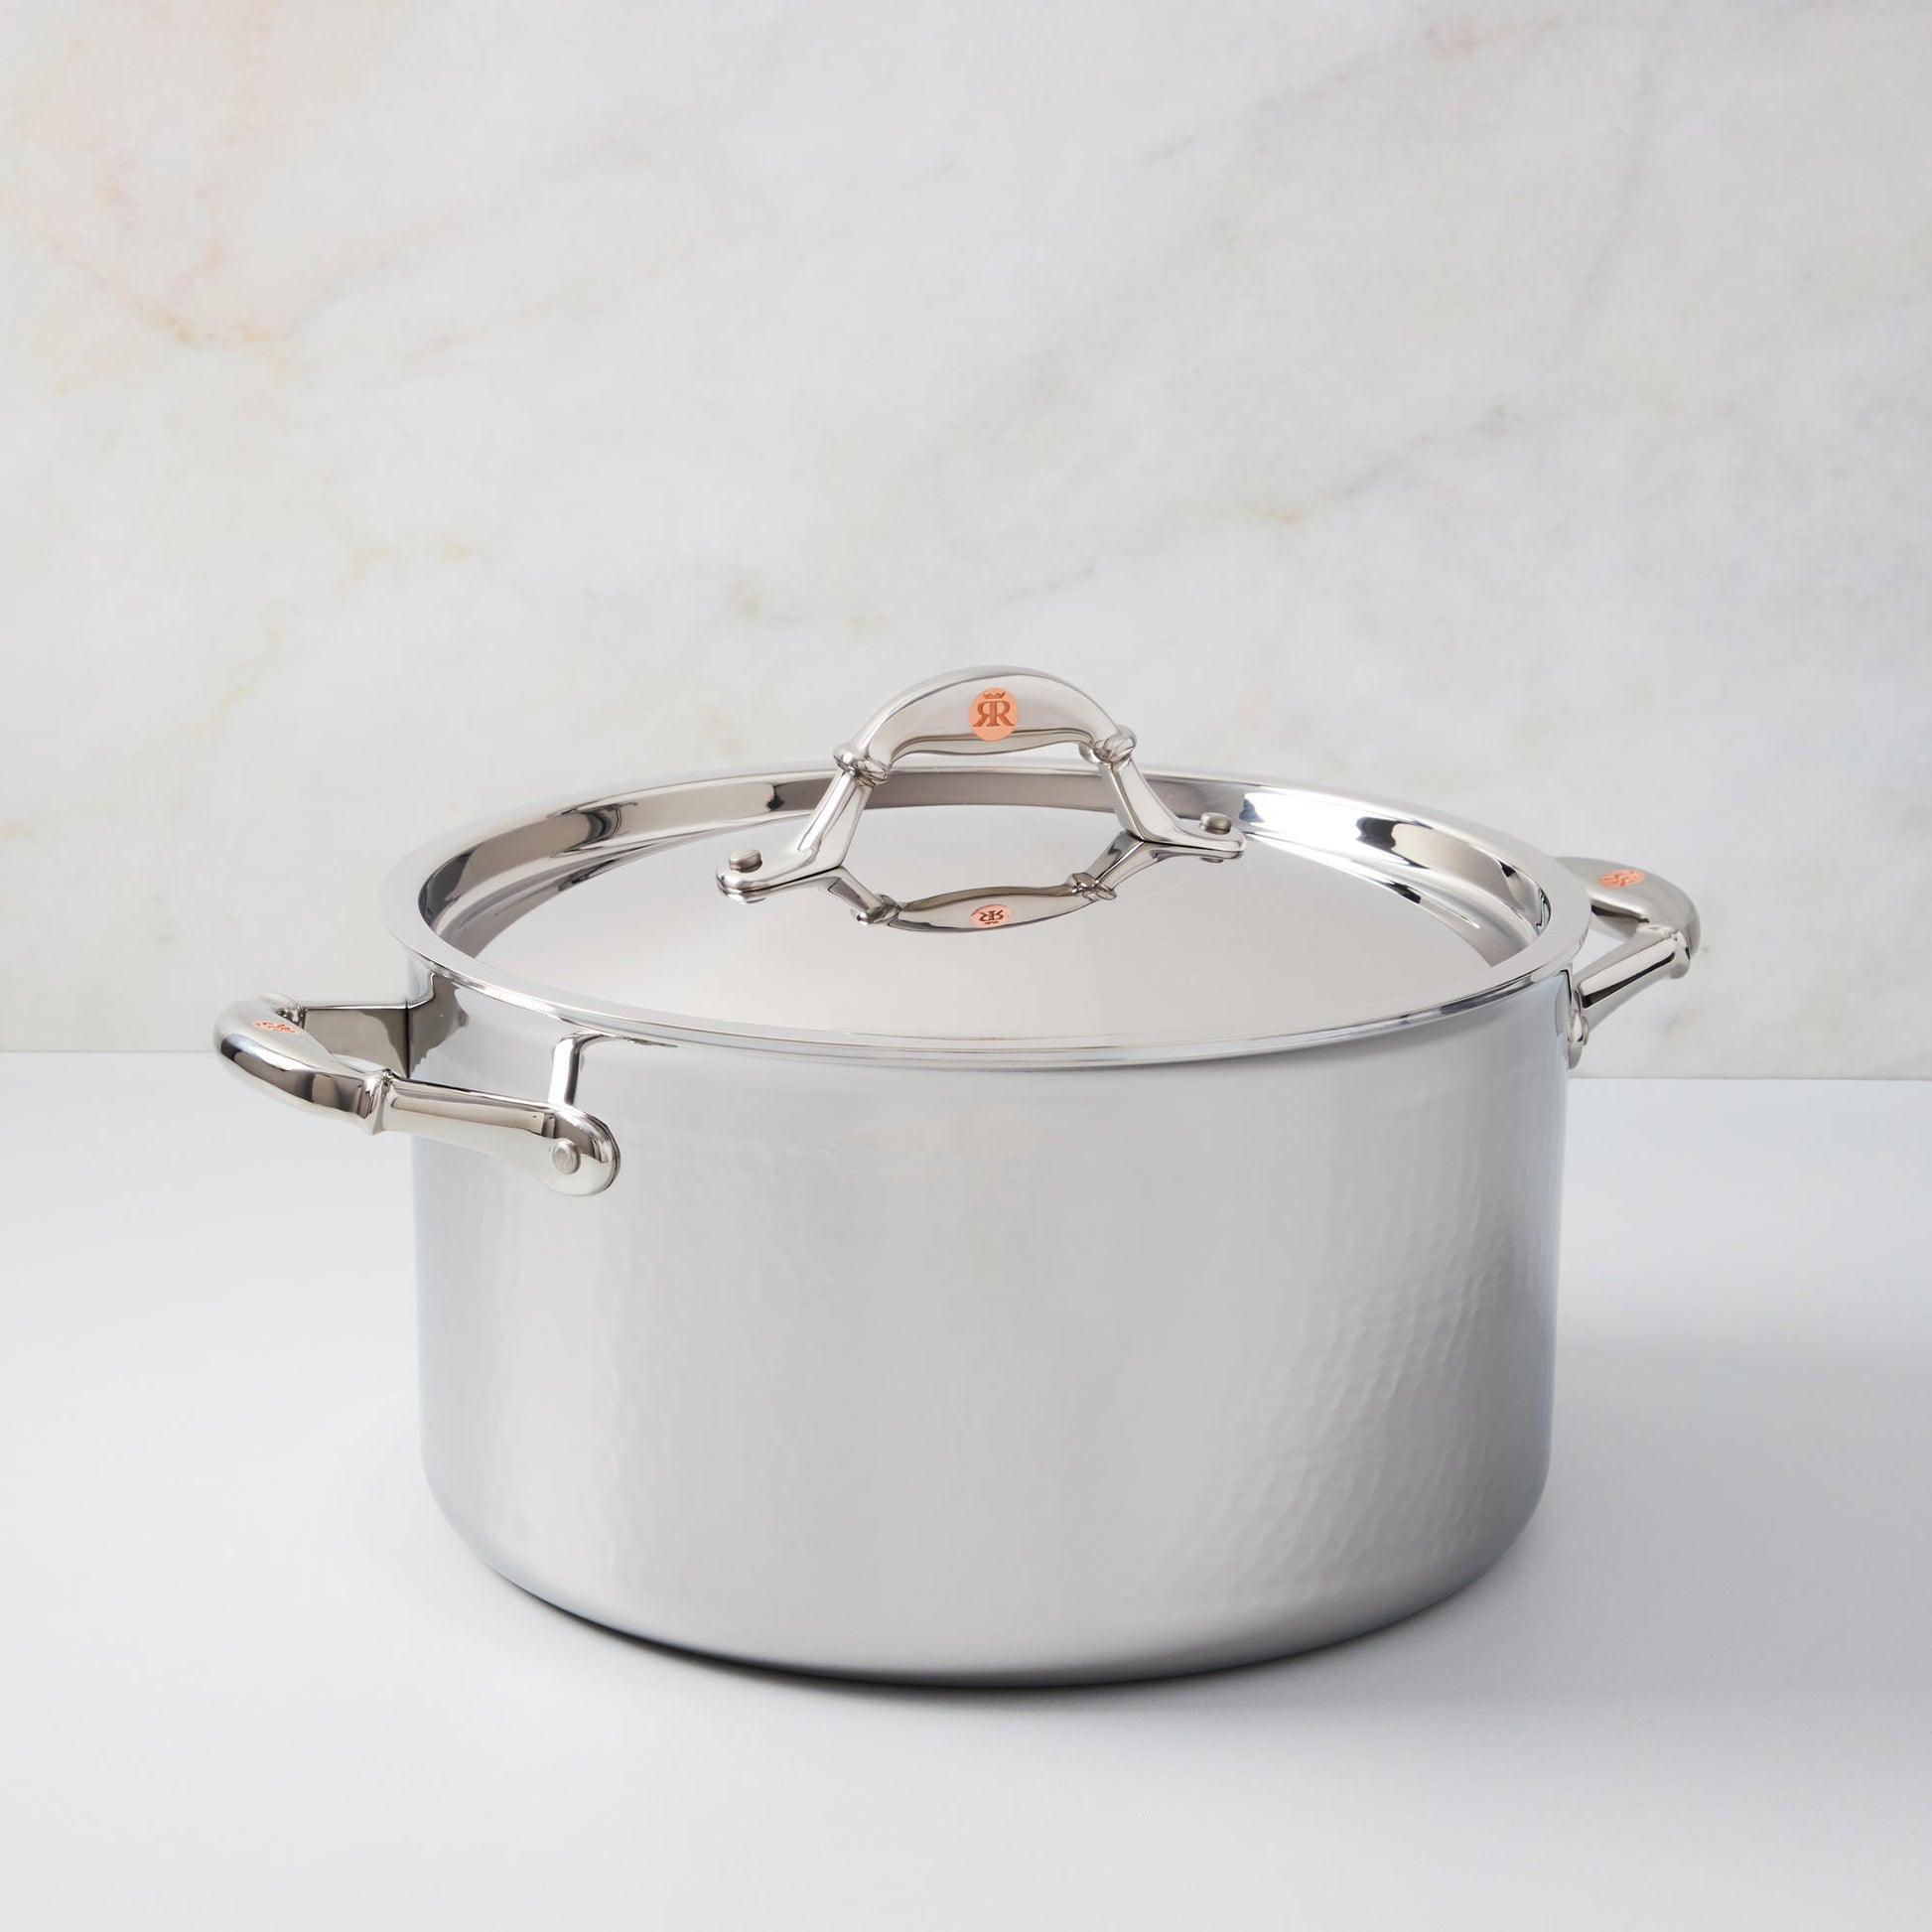  Hammered clad stainless steel stockpot with lid from Ruffoni